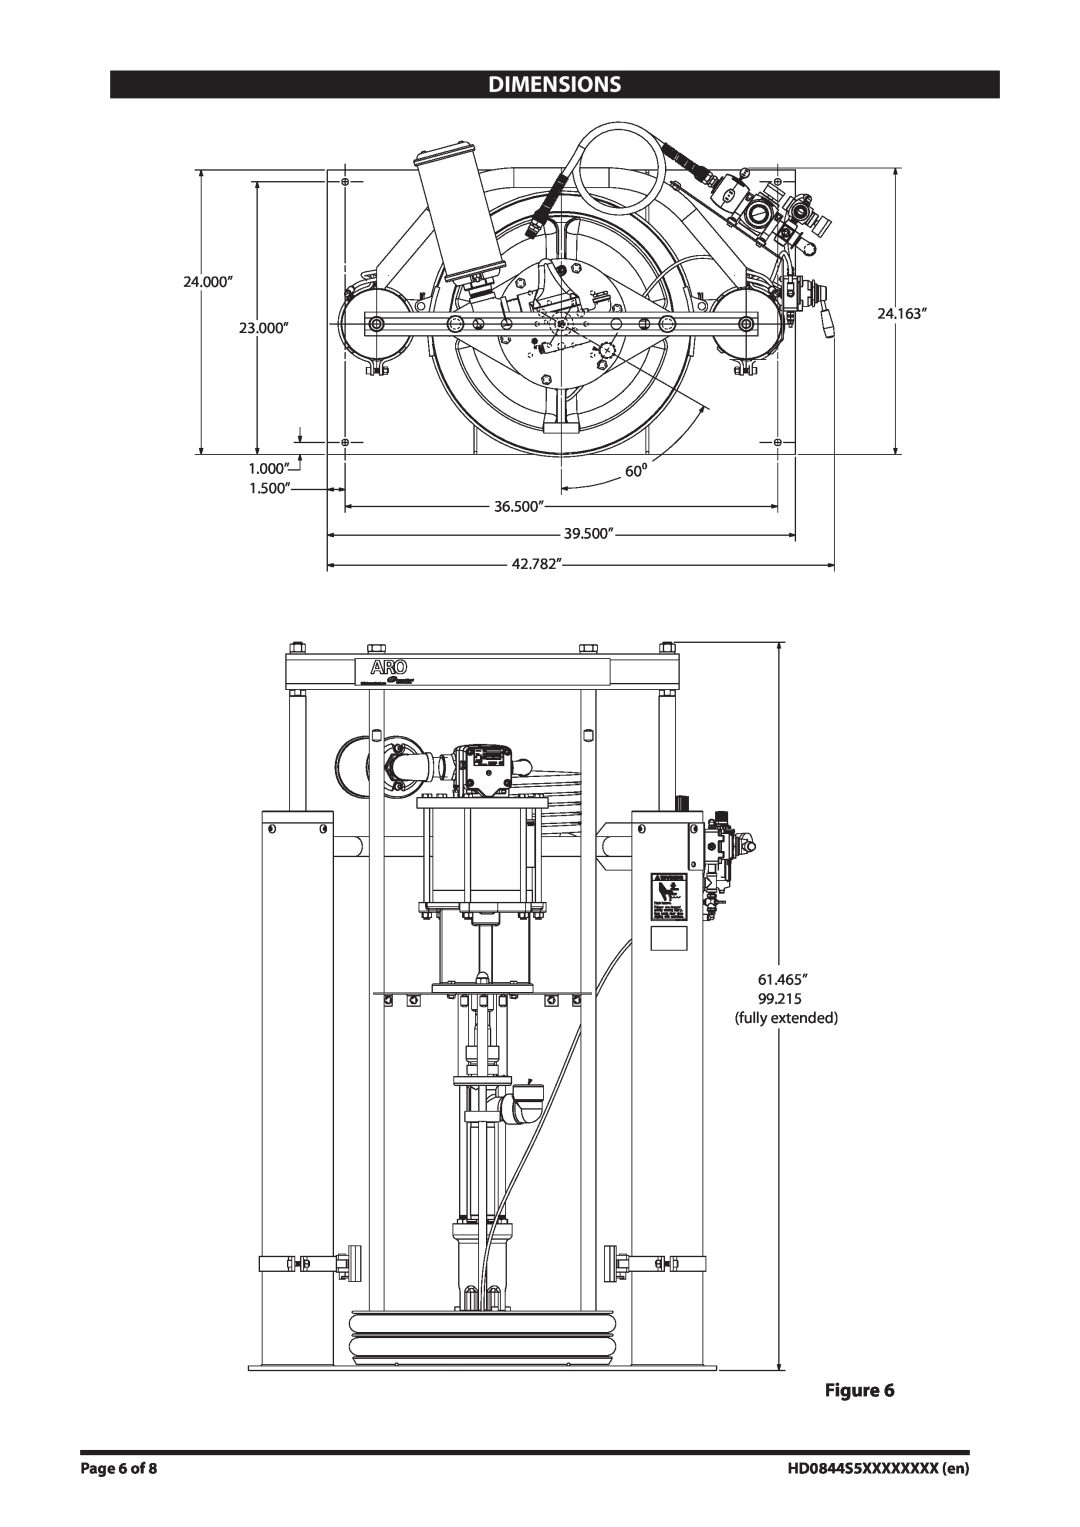 Ingersoll-Rand manual Dimensions, Page 6 of, HD0844S5XXXXXXXX en 